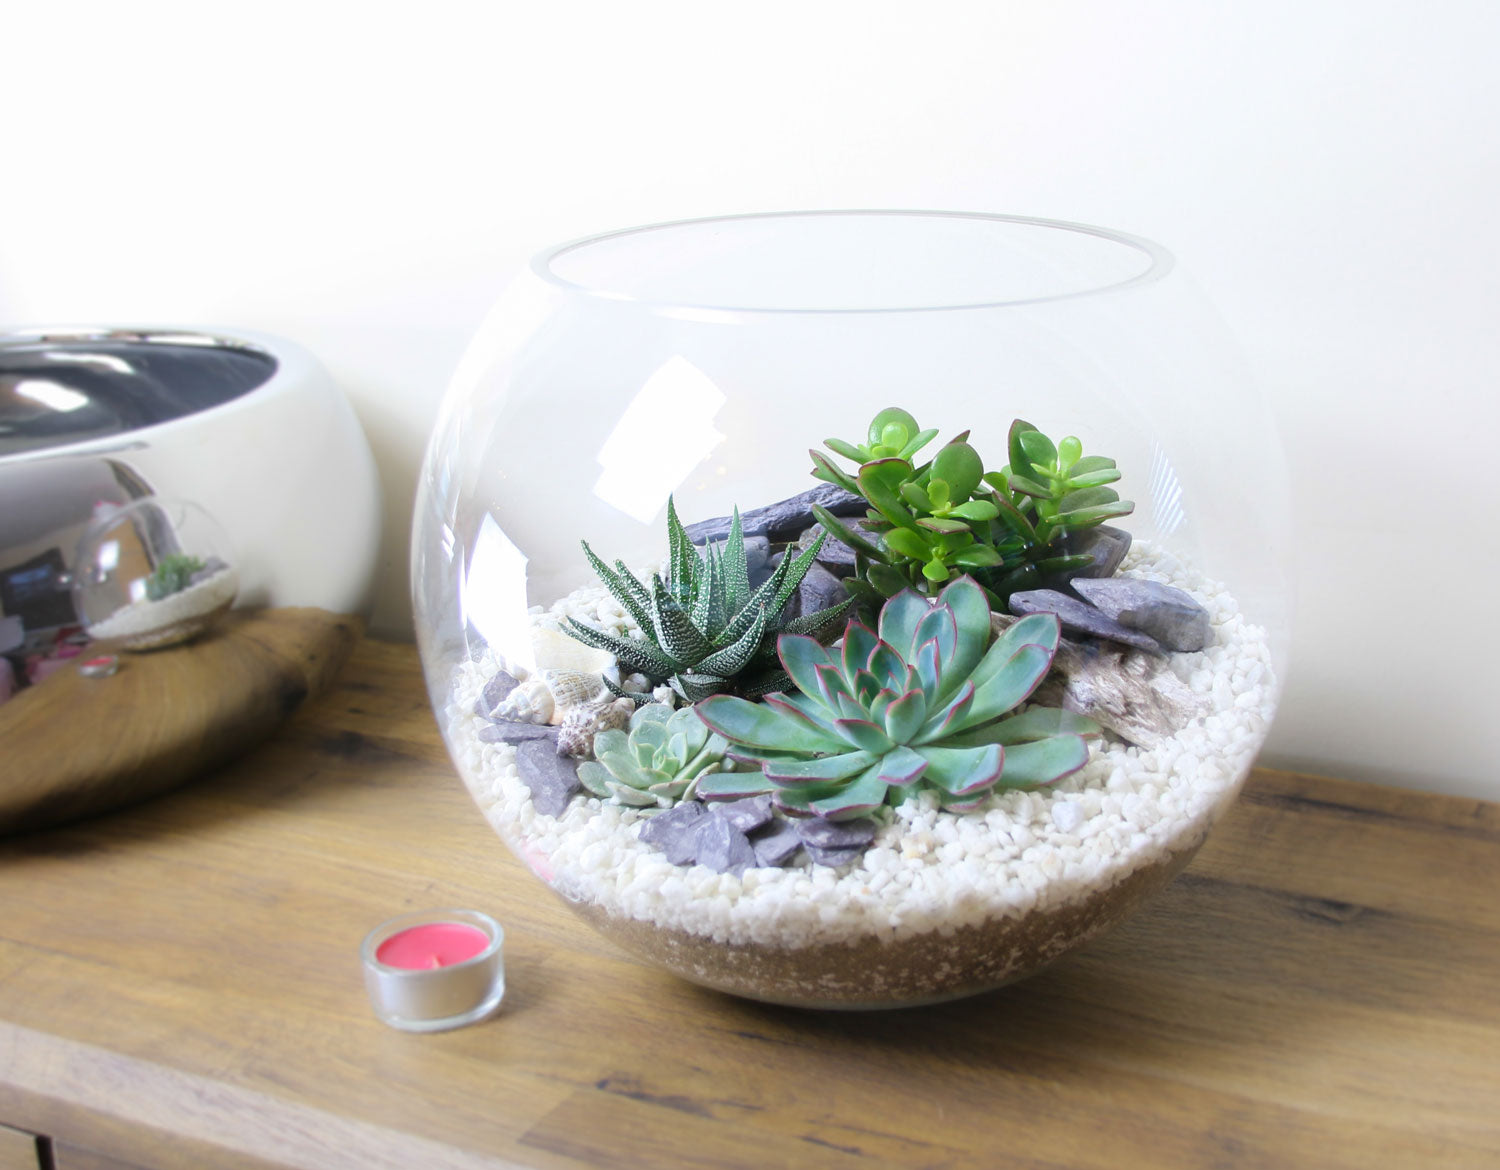 Slate and gravel terrarium from The Art of Succulents